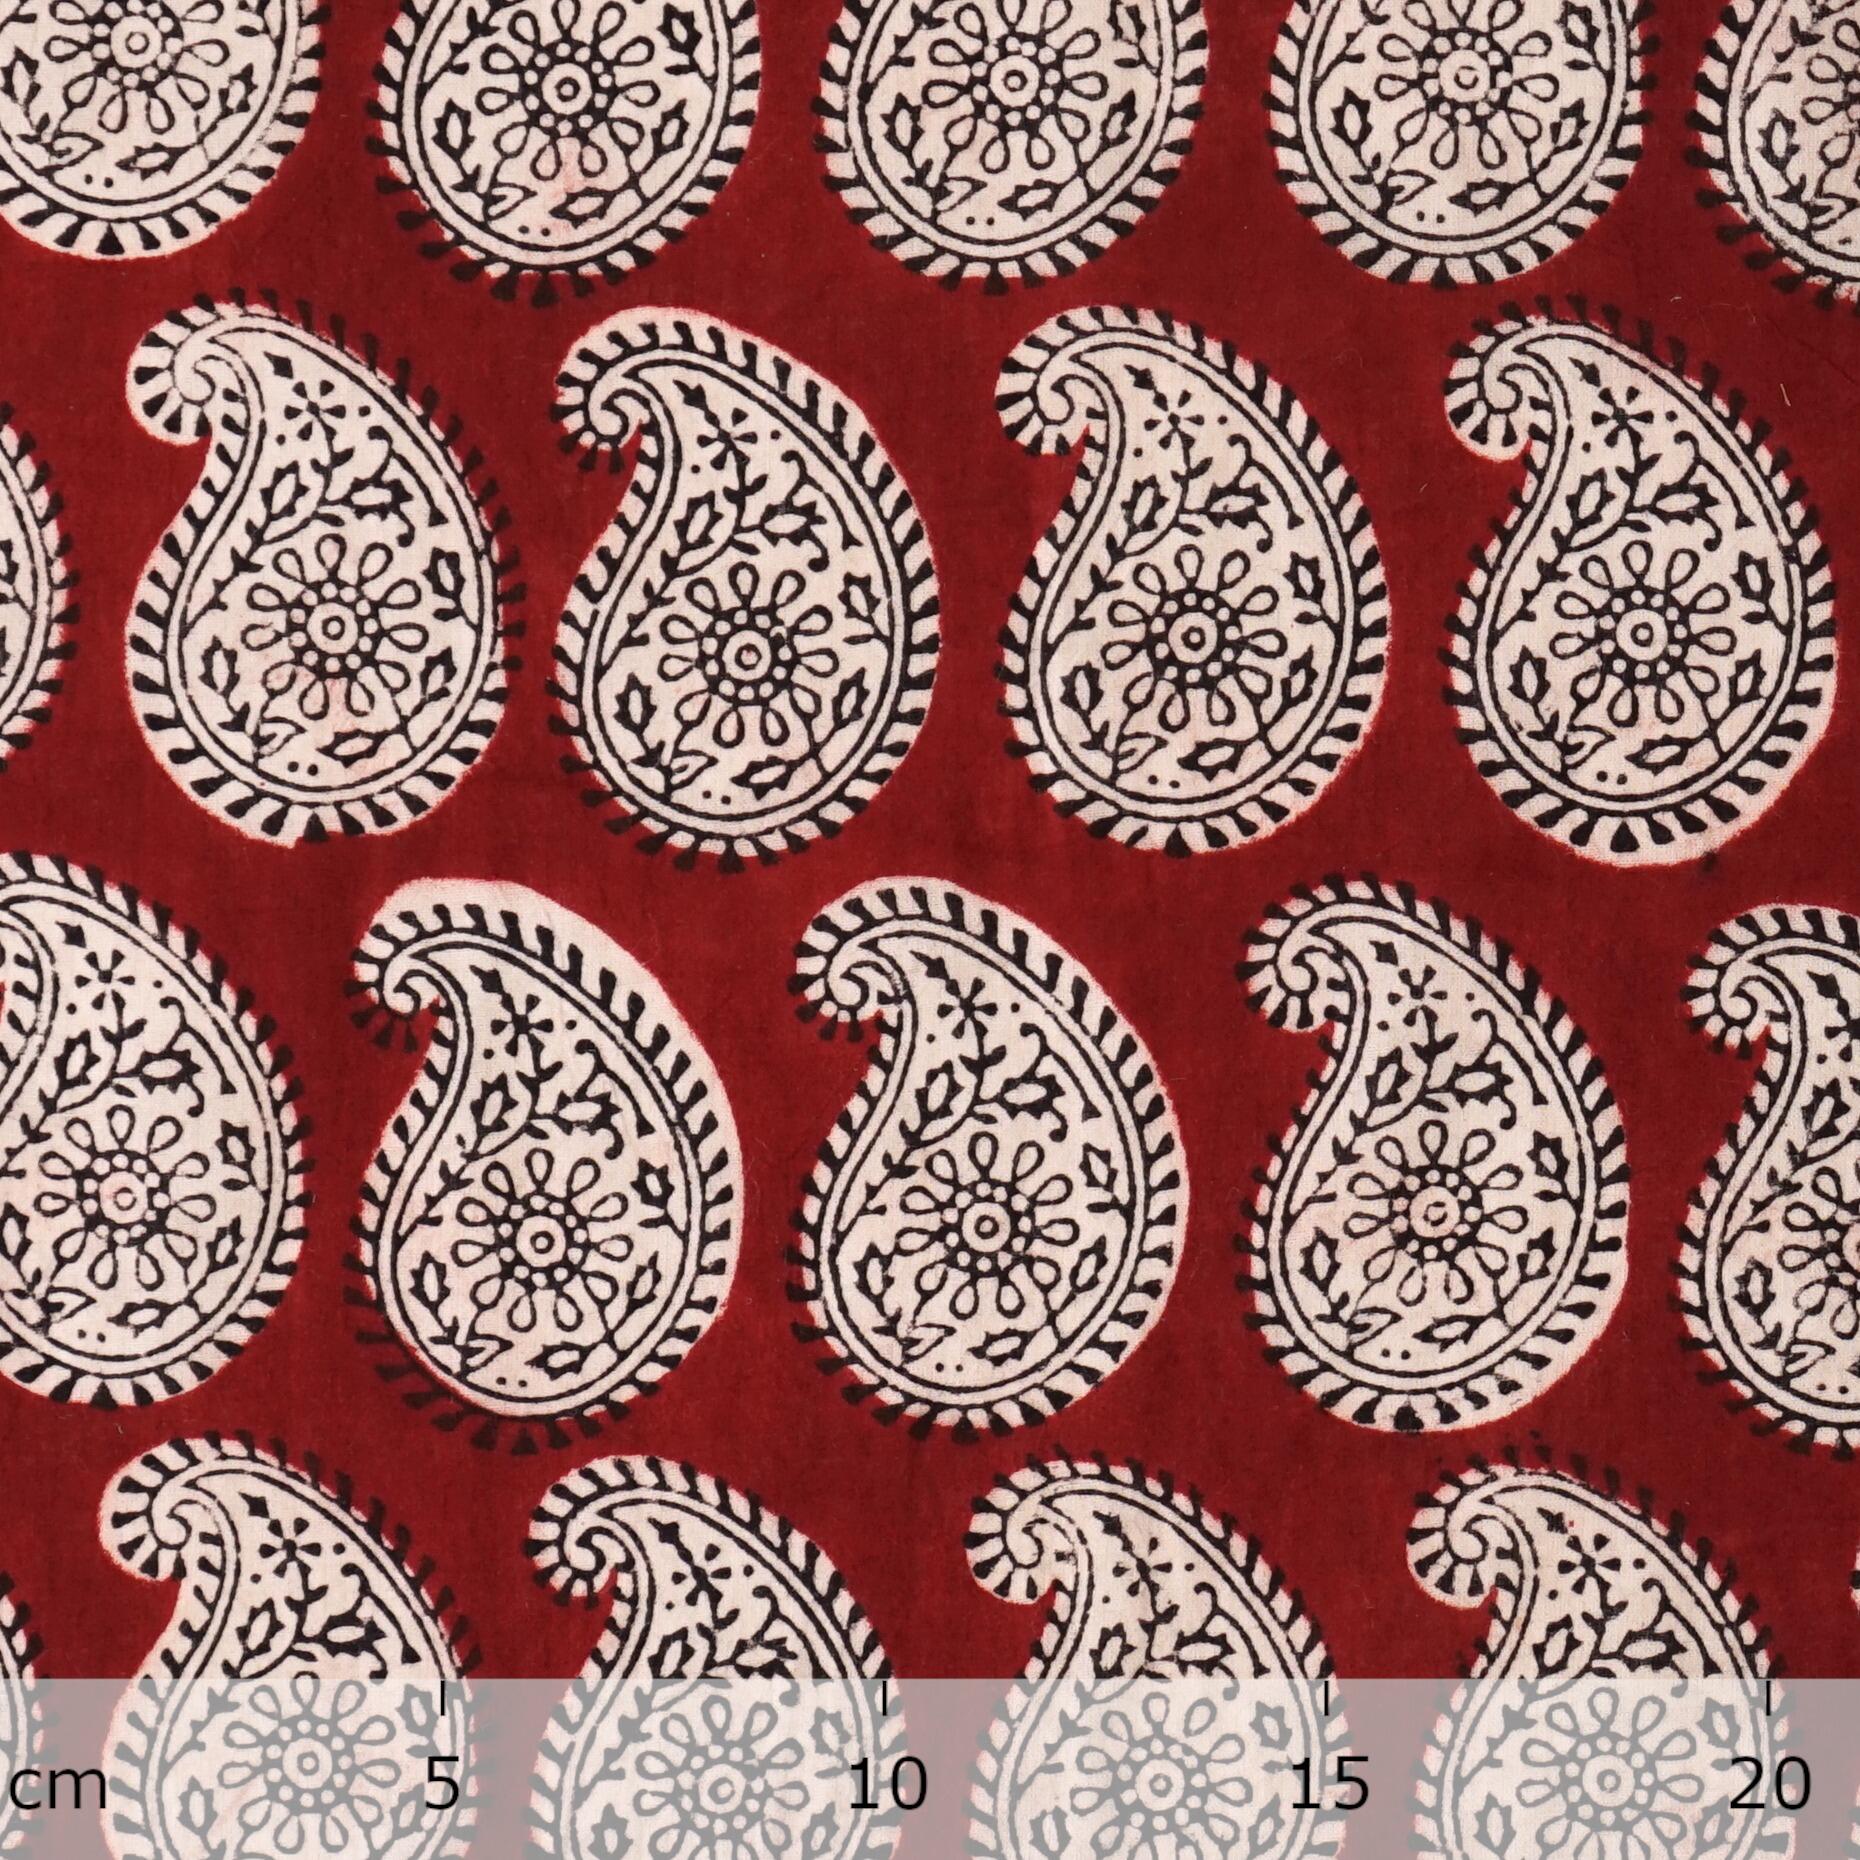 100% Block-Printed Cotton Fabric From India- Bagh - Alizarin Red Paisley Print - Ruler